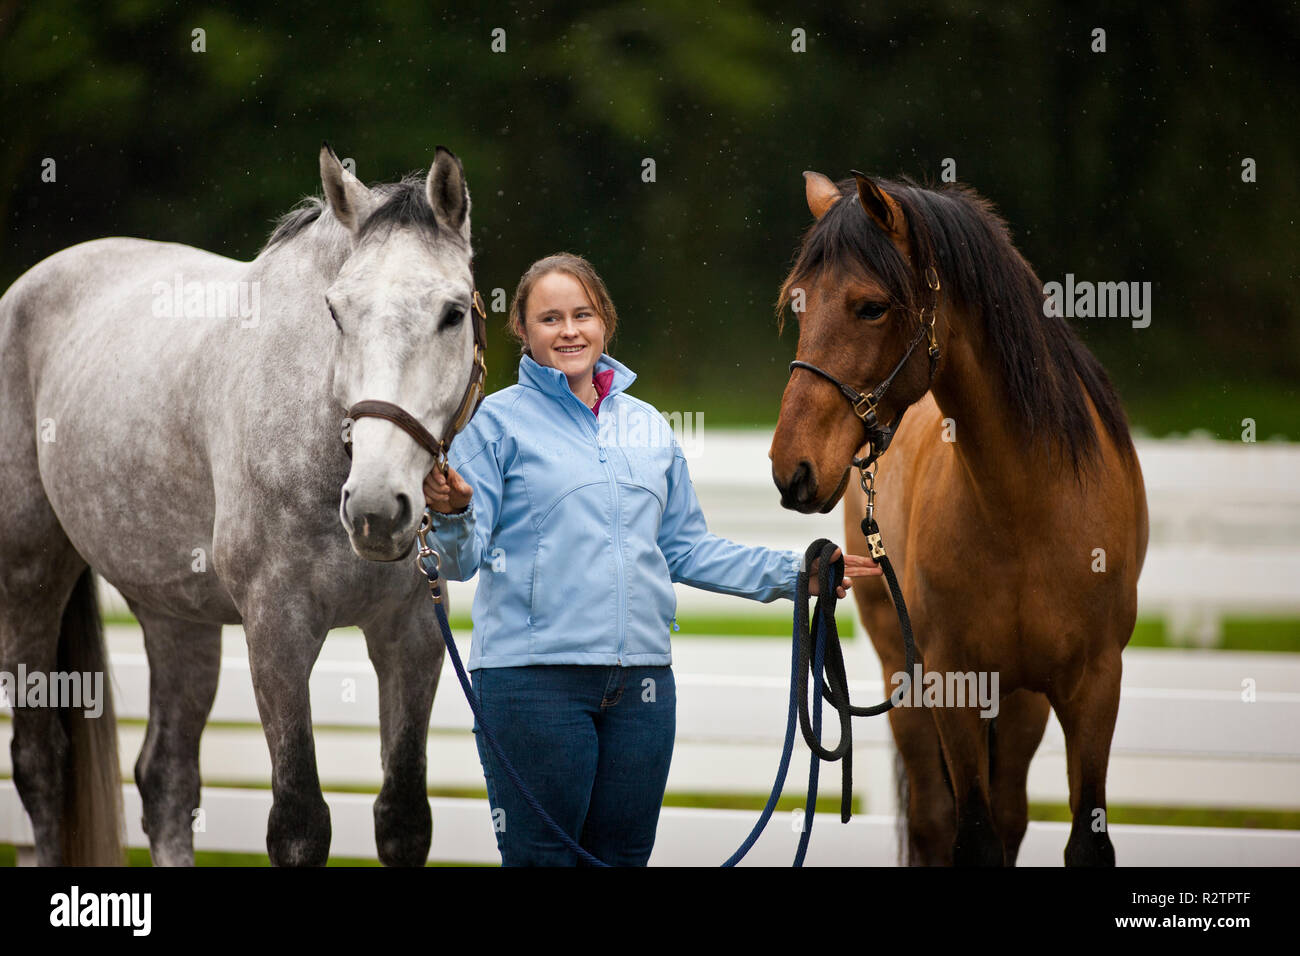 Smiling young woman leading two horses by their bridle. Stock Photo